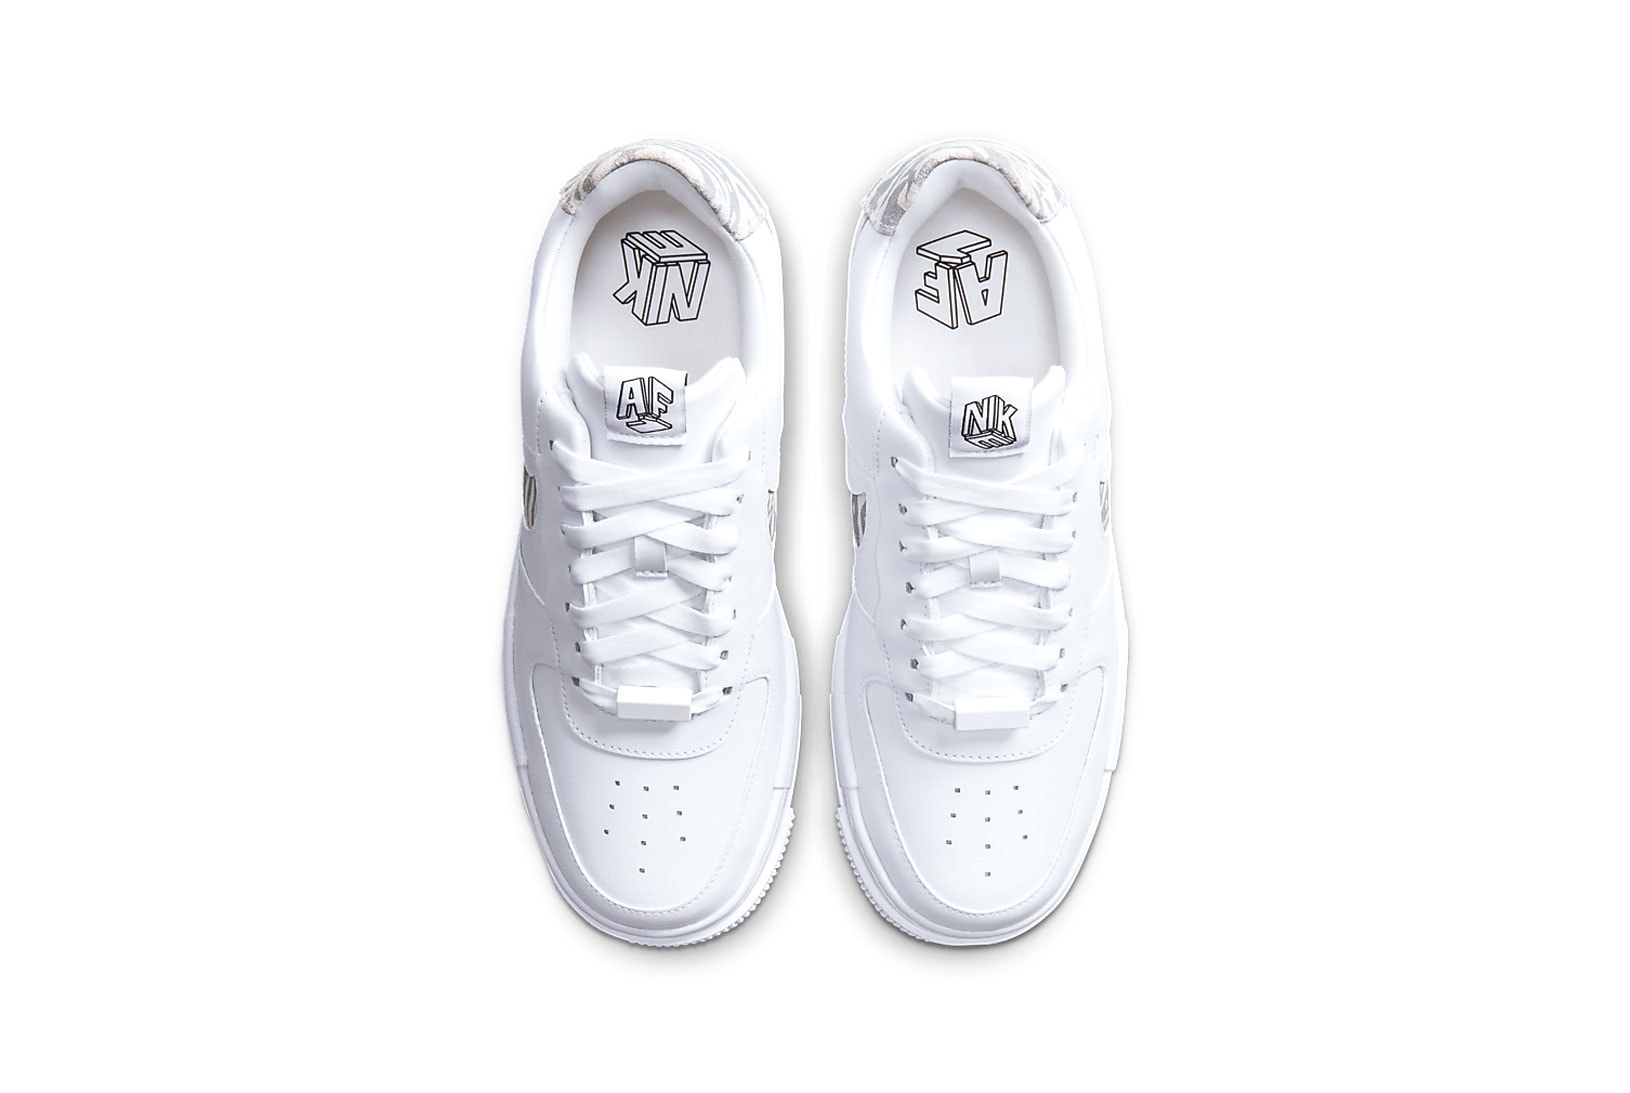 Top view of Nike Air Force 1 SE Pixel